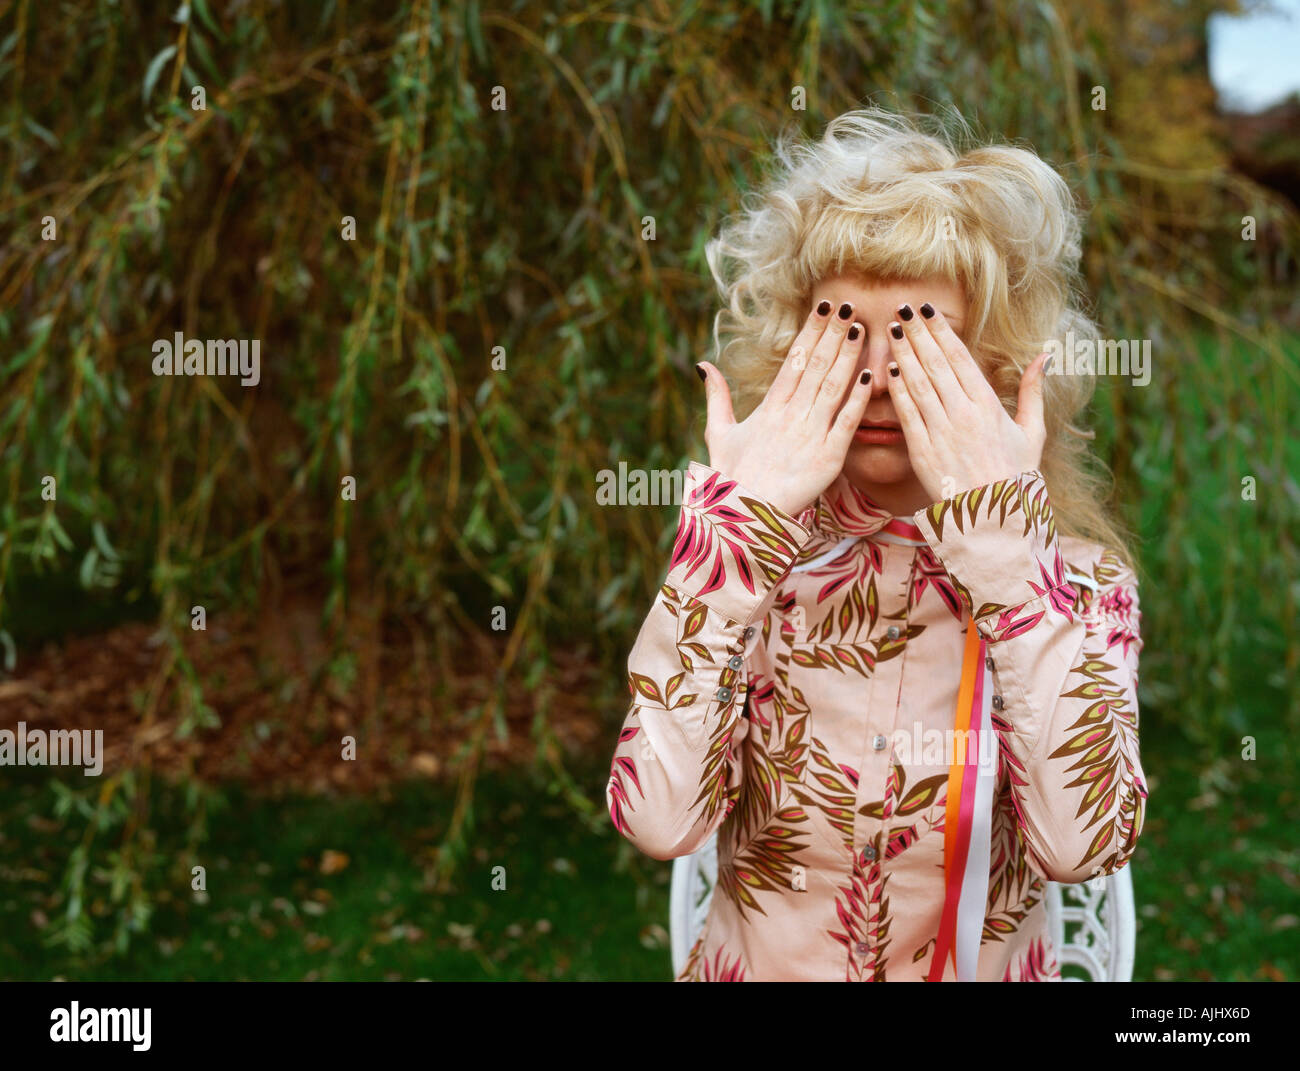 Woman in garden covering eyes Stock Photo